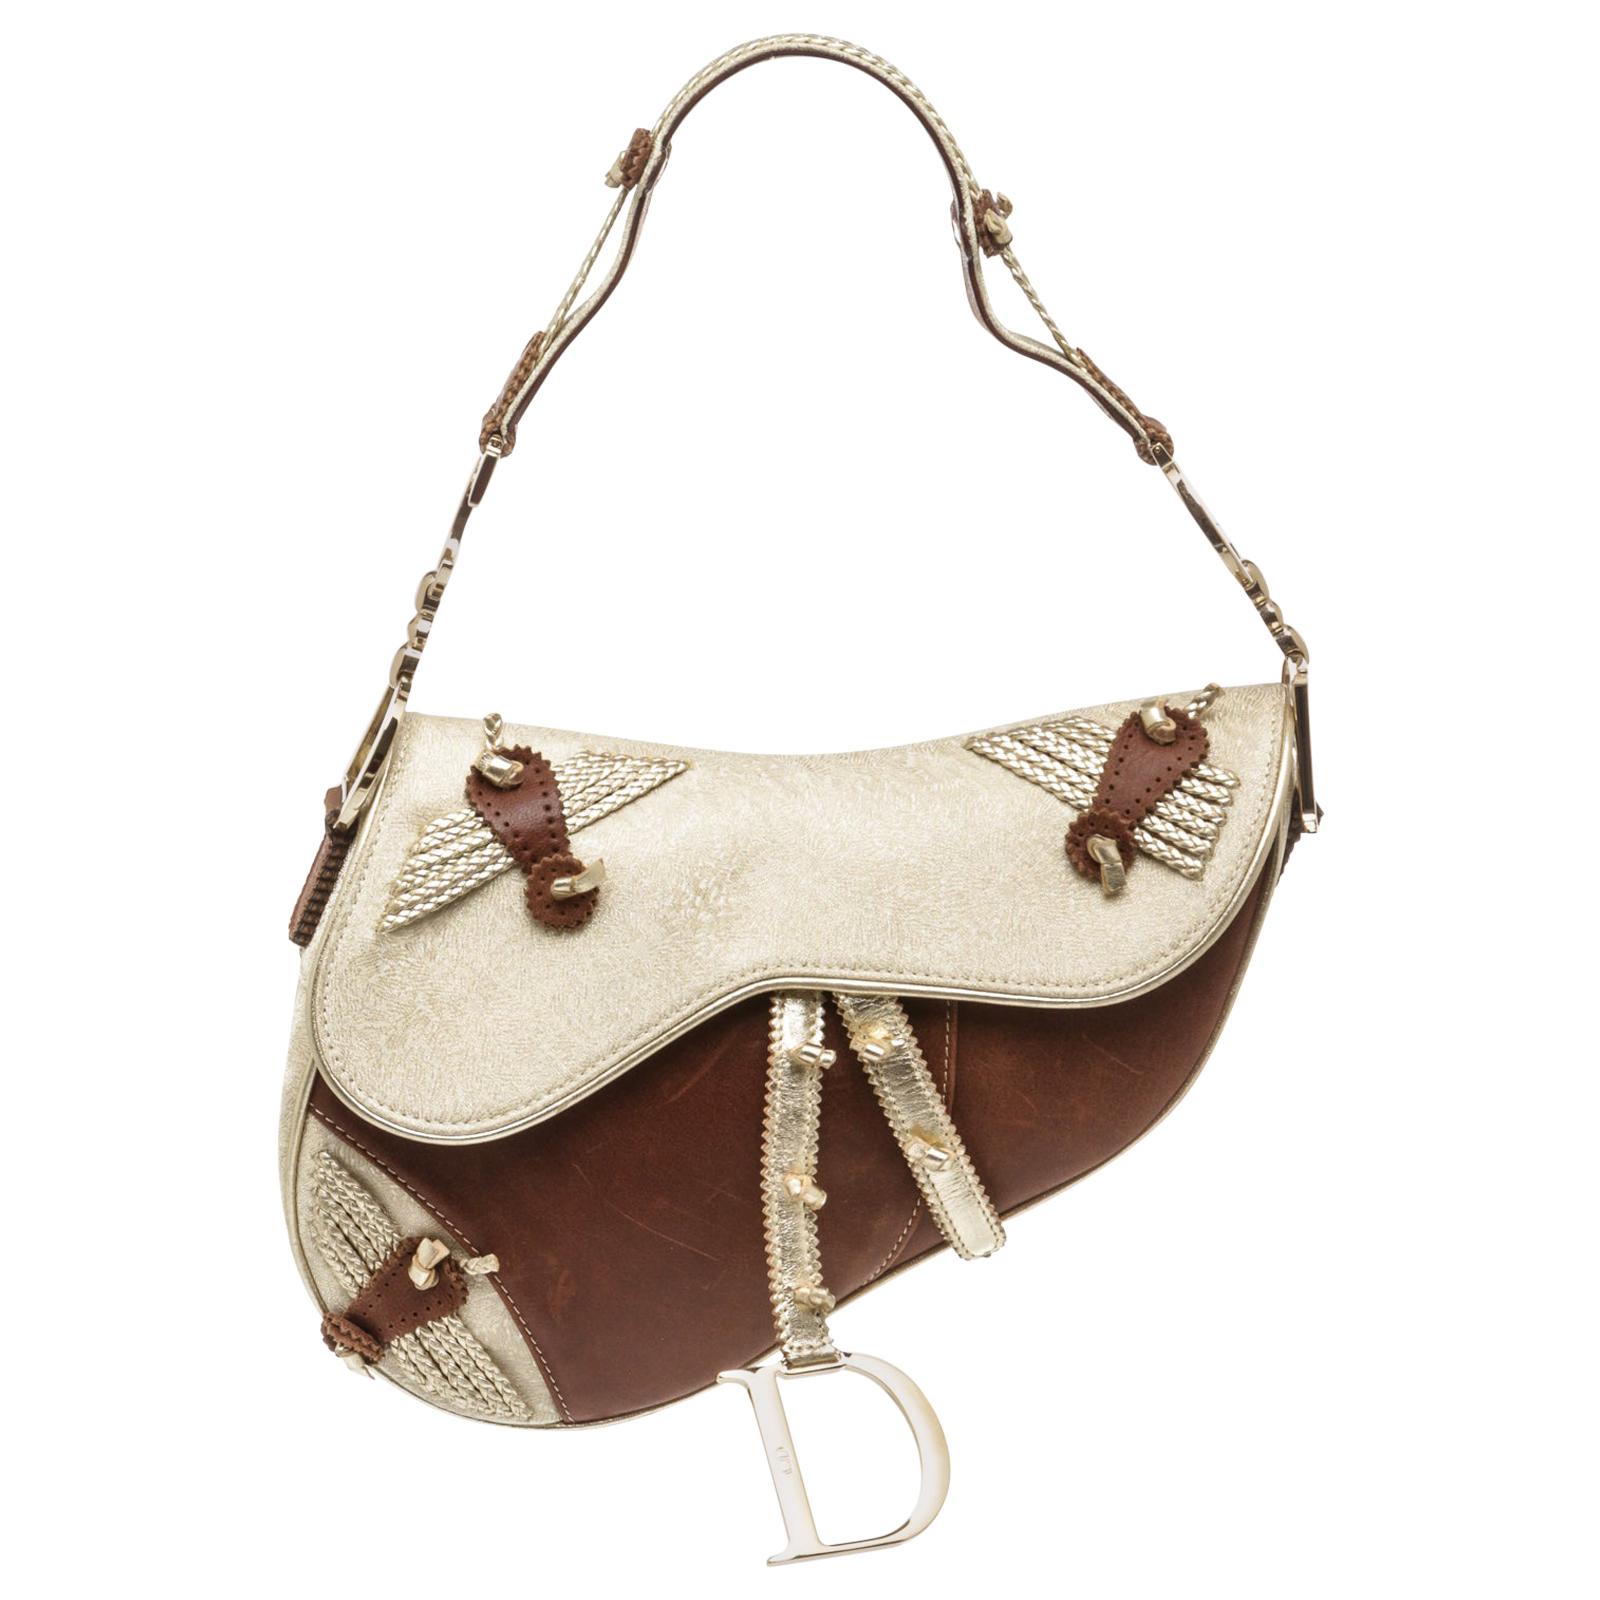 Dior - Saddle Bag with Strap Brown Lambskin with A Patina Finish - Women